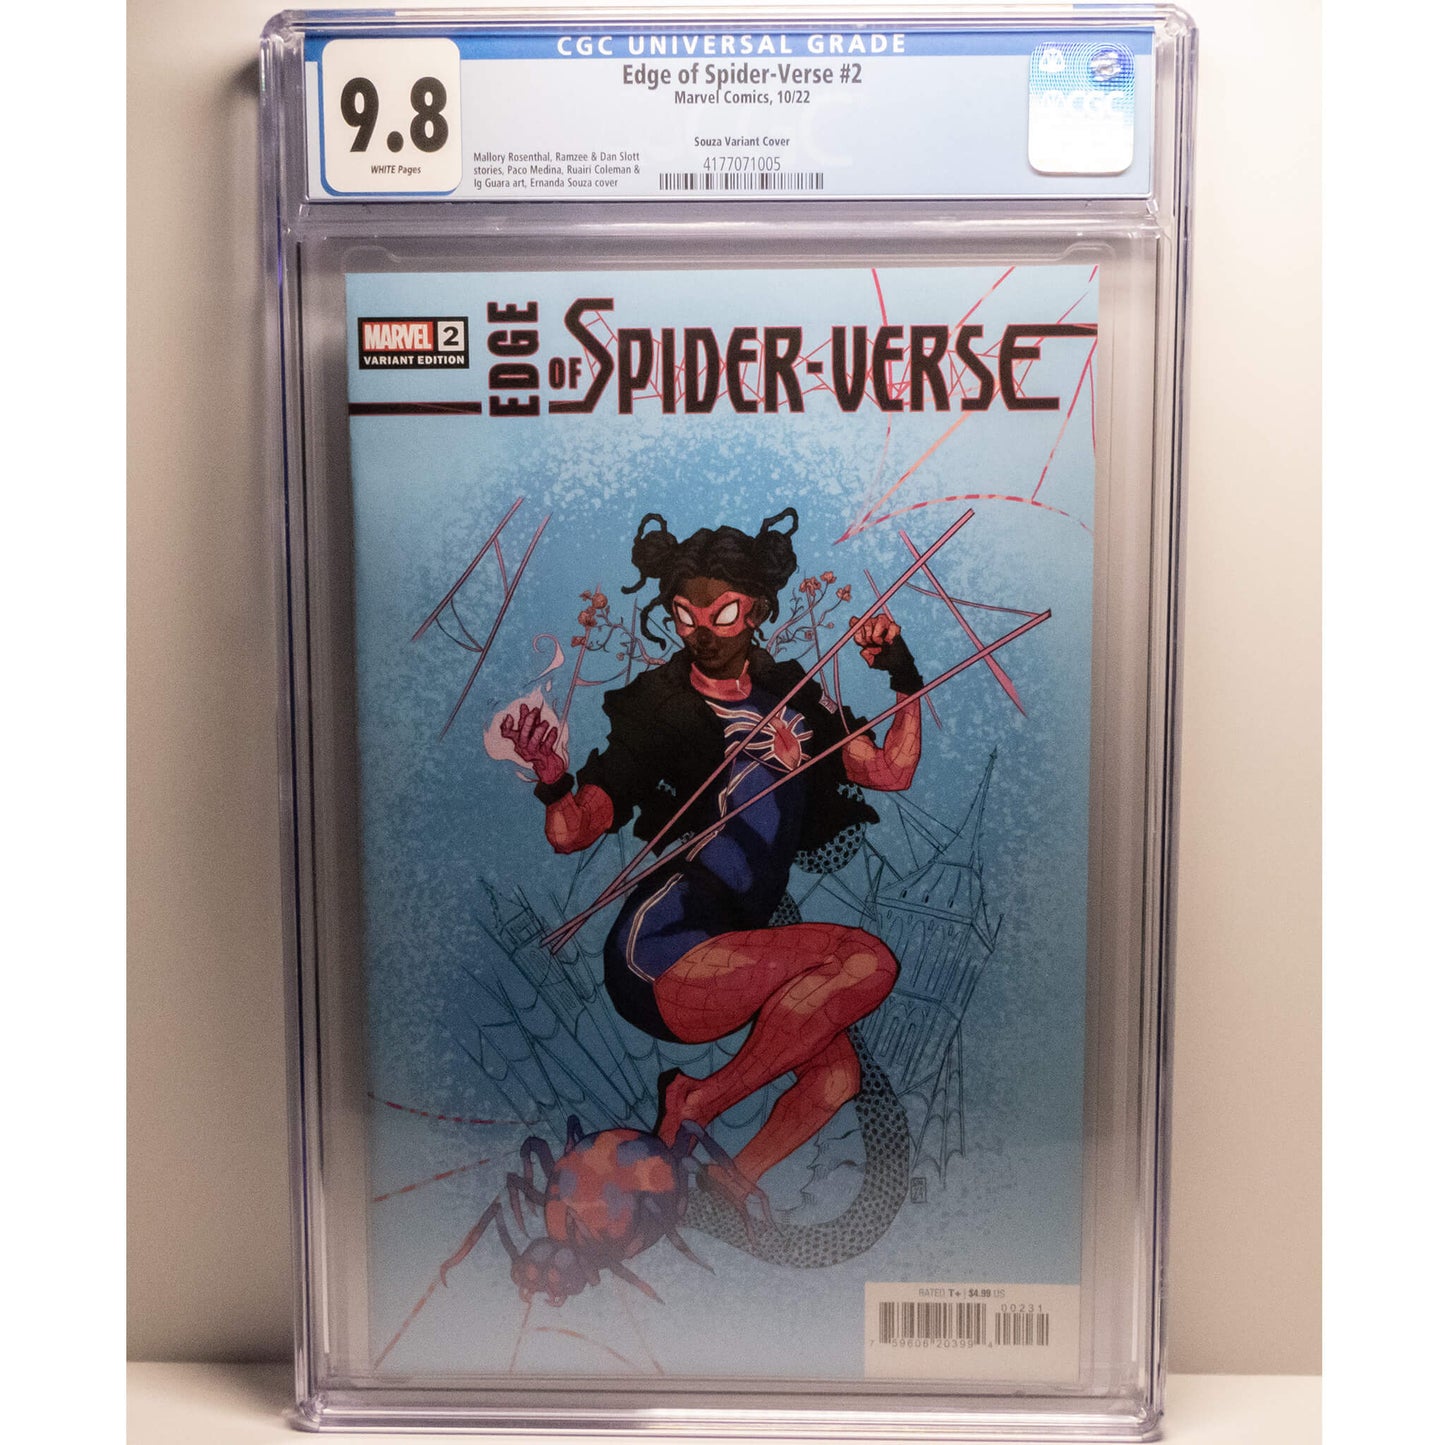 edge of spider verse issue 2, CGC 9.8, variant cover, end of earth one